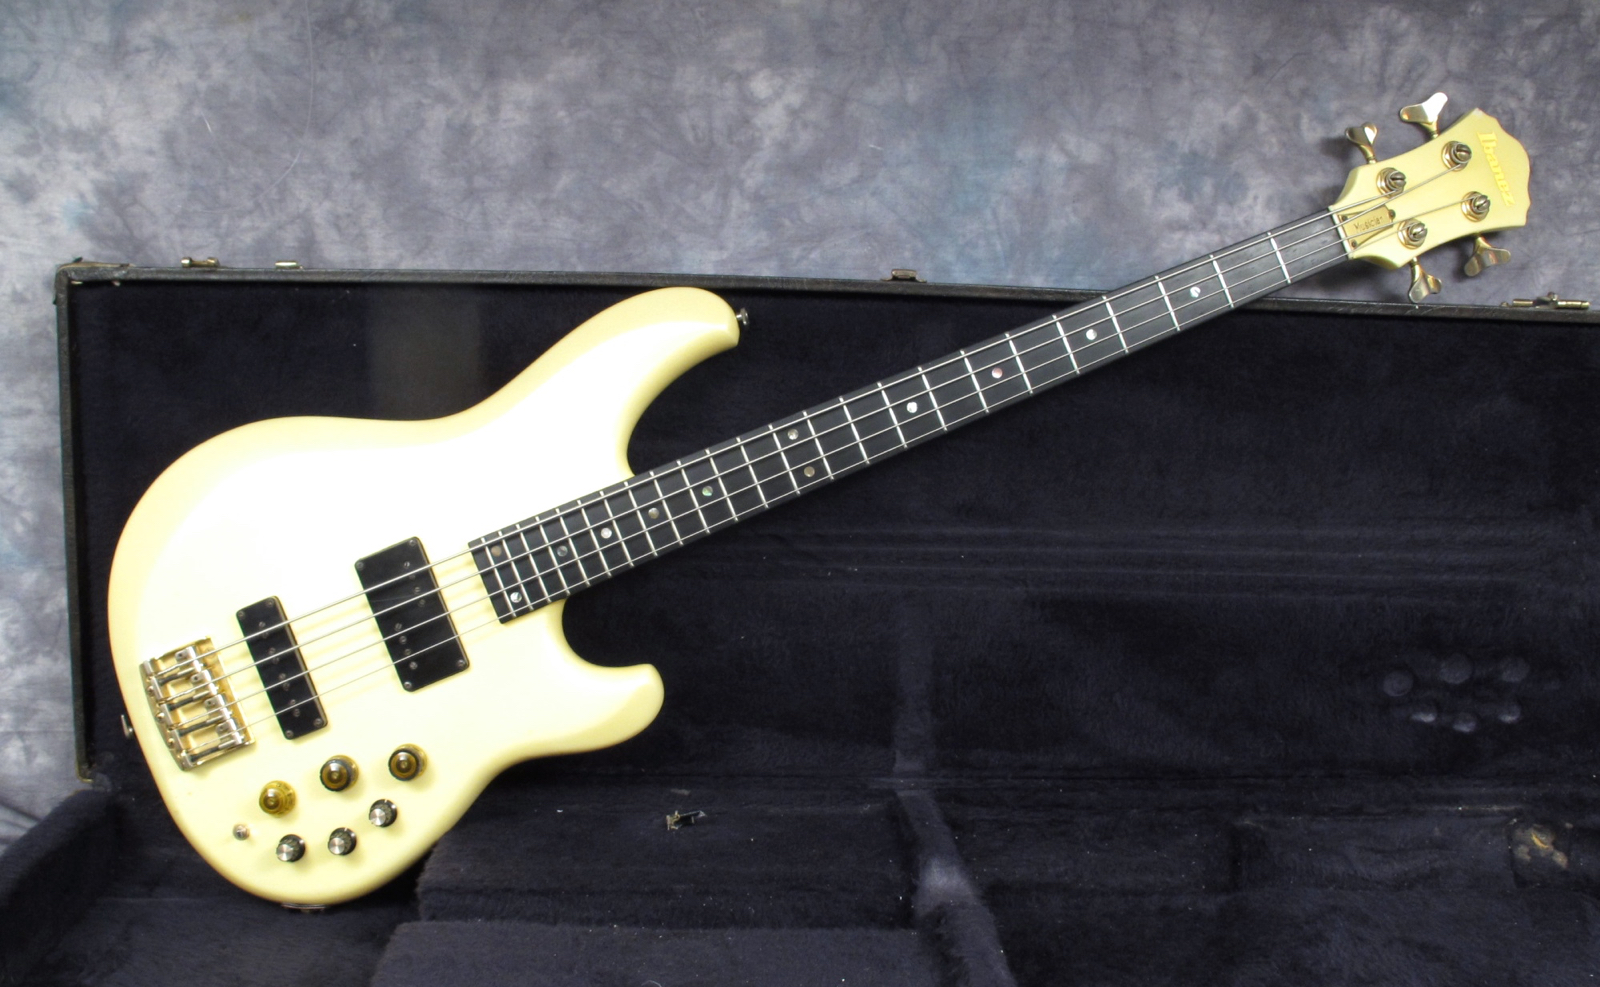 Ibanez Musician Mc924pw 1984 Translucent White Bass For Sale Andy Baxter Bass Guitars Ltd